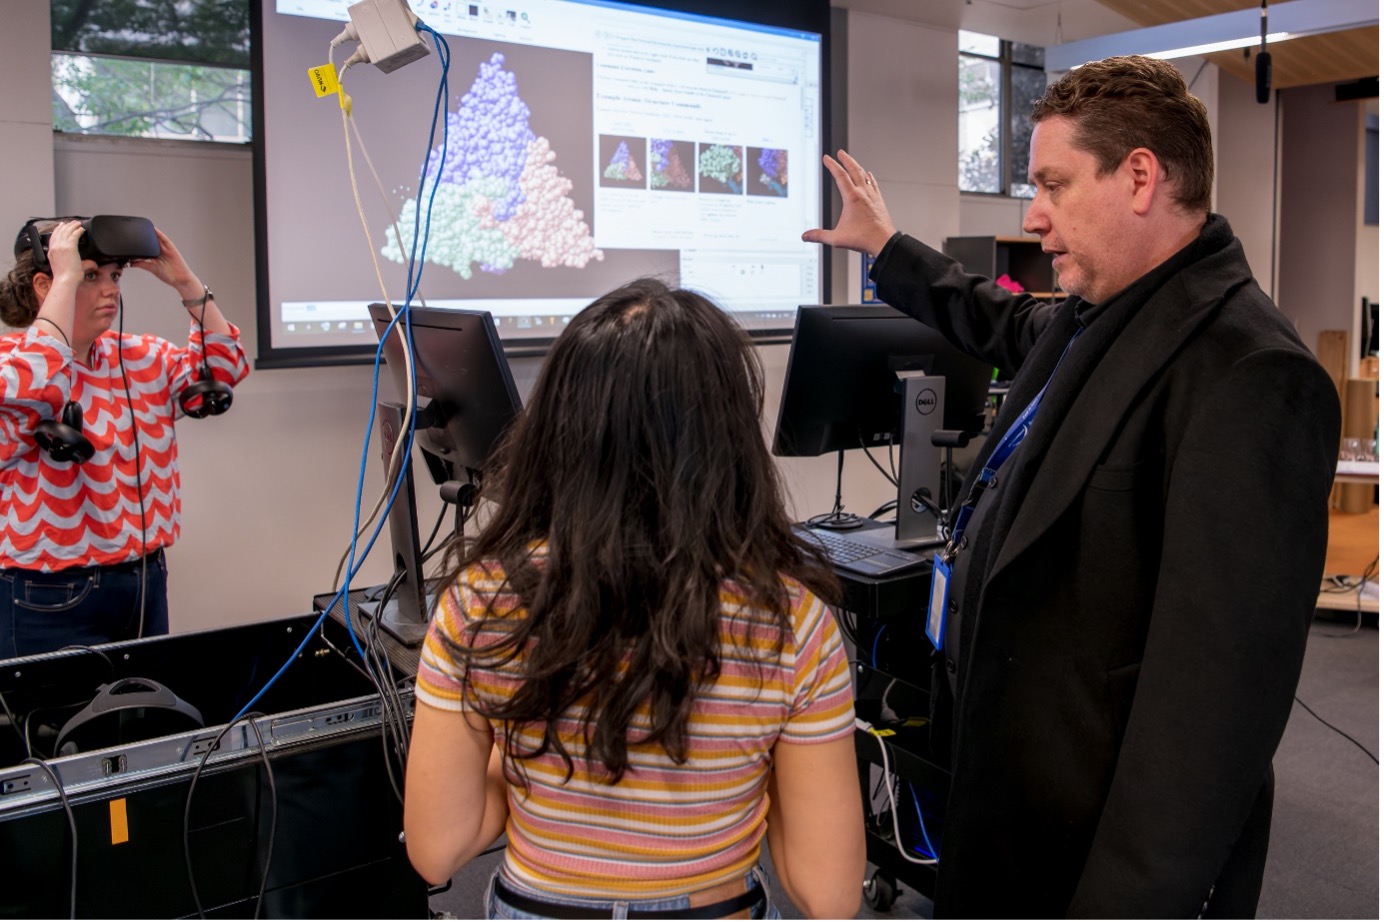 Dr Jason Roberts (right) teaches students how to manipulate virus structures in virtual reality.